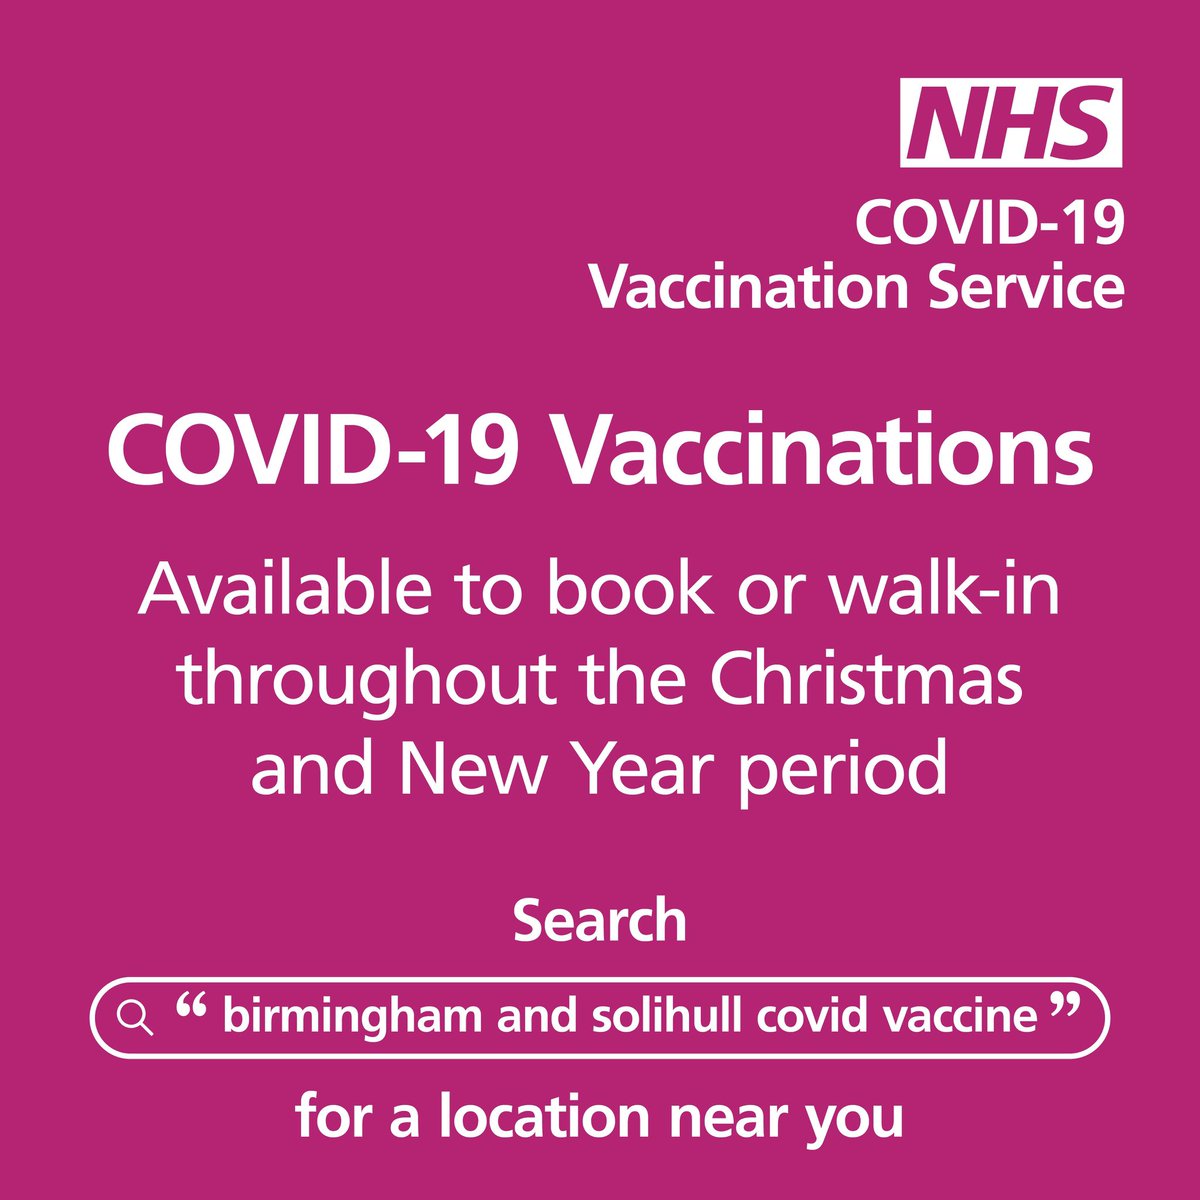 Roll up, roll up (literally!) We have an additional Covid Vaccination Centre @AVFCOfficial Football Ground Holte Suite from Monday 3rd January-Sunday 9th January open 09.30-15.00. No appointment necessary. Just make your way there and get your vital first, second or booster jab.